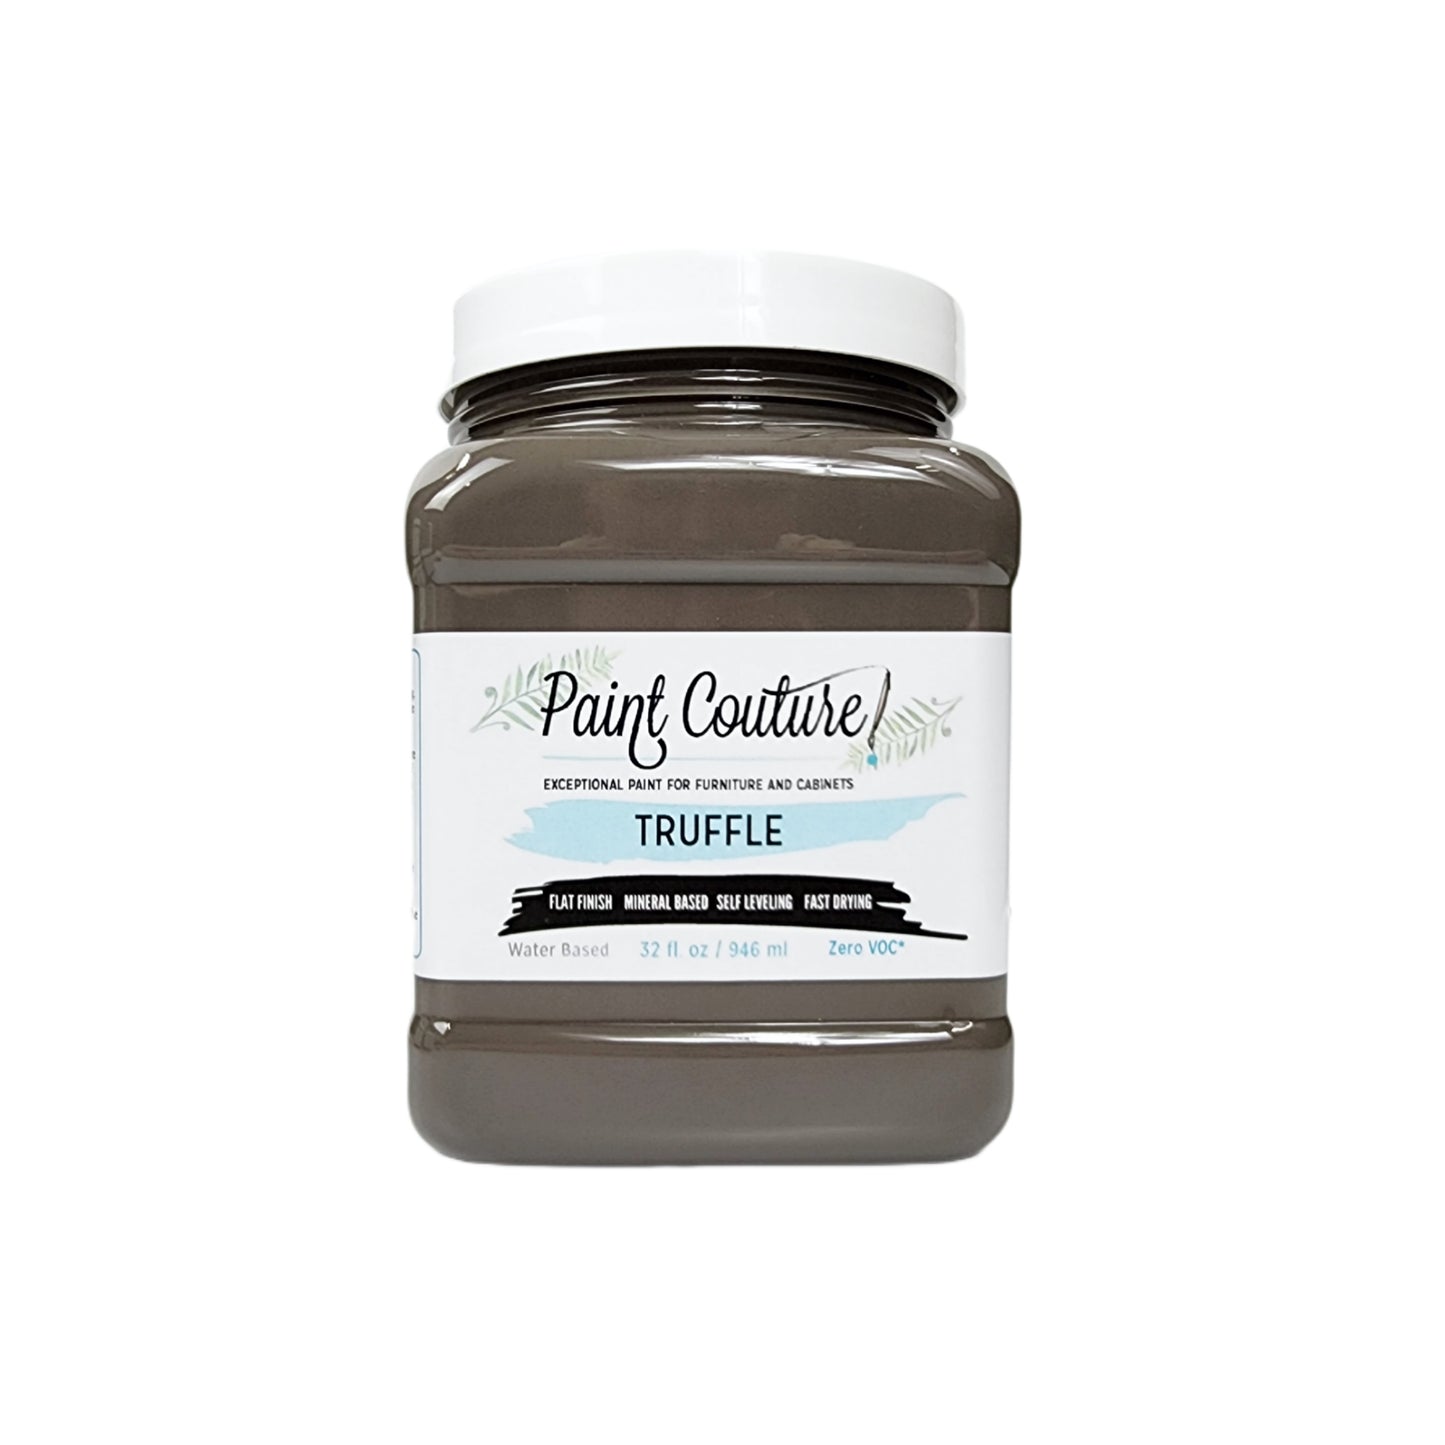 Paint Couture Truffle